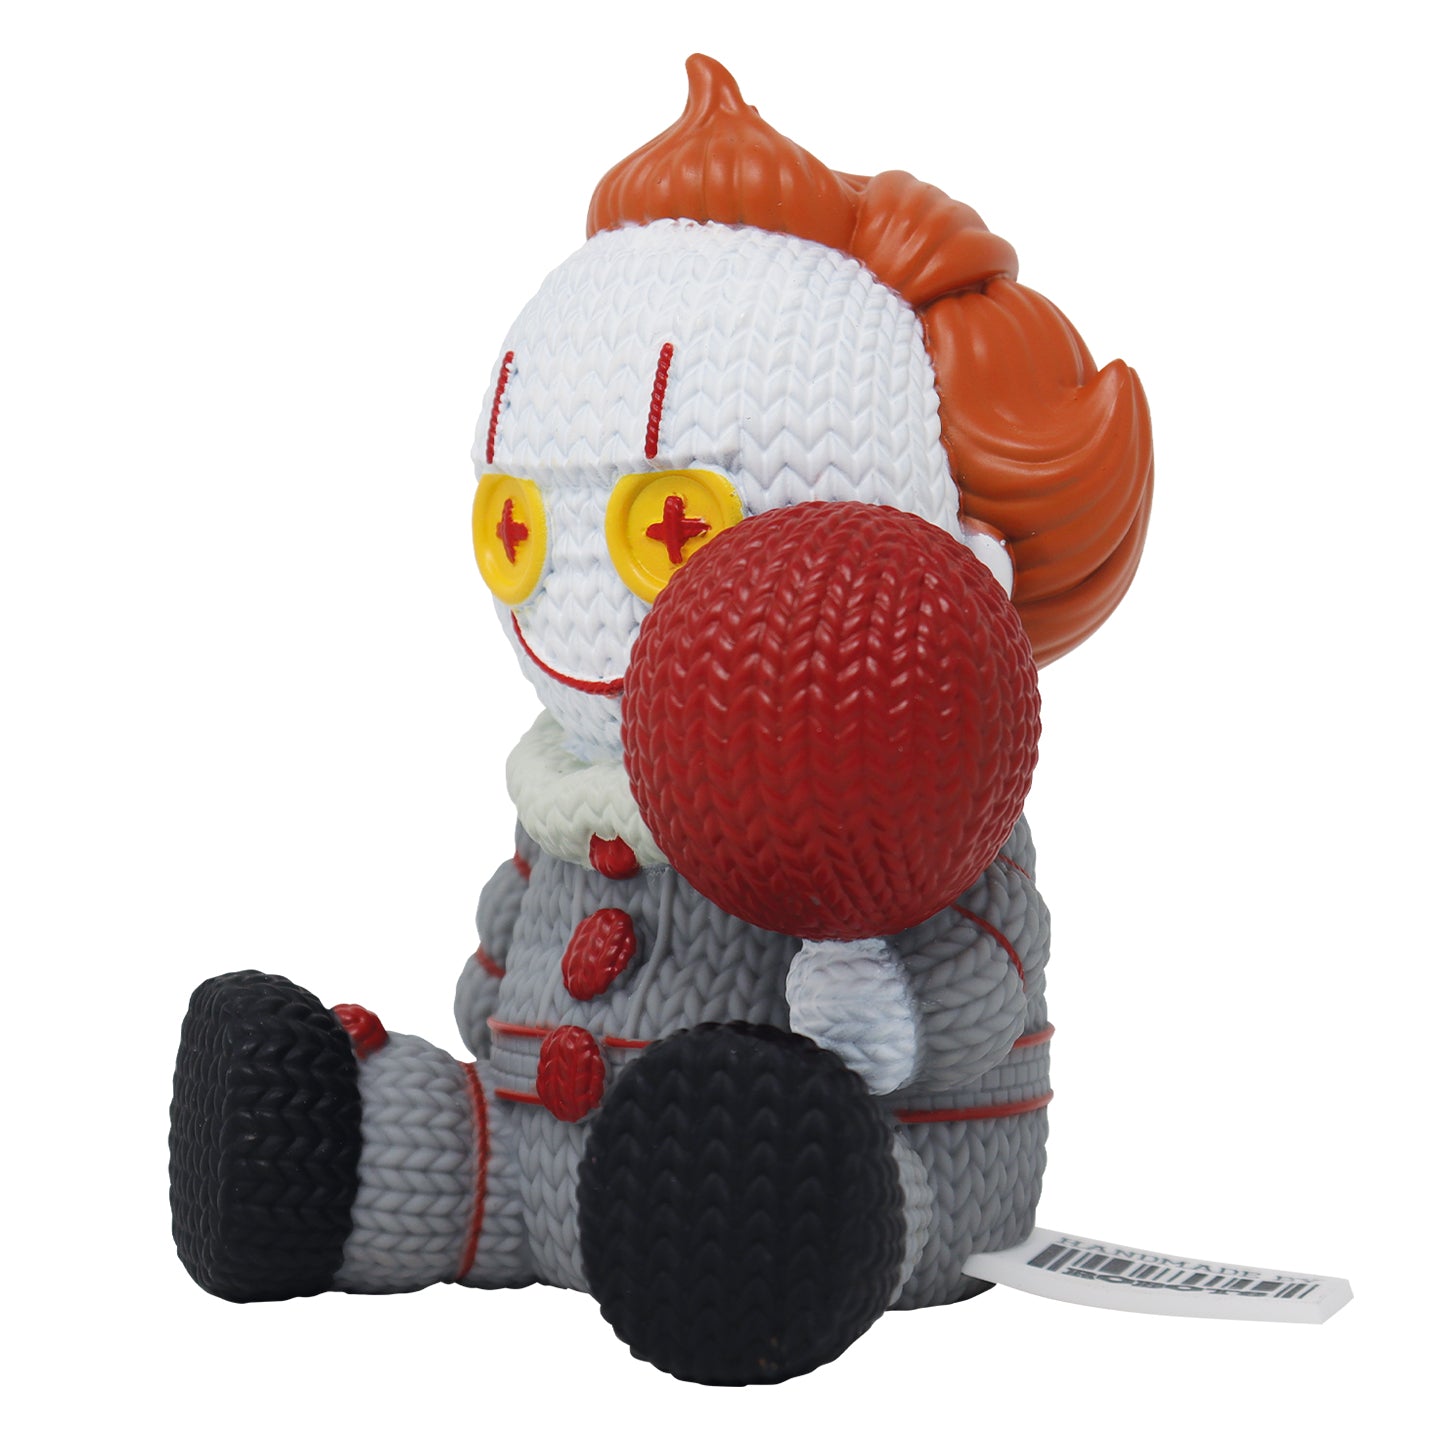 IT - Pennywise Collectible Vinyl Figure from Handmade By Robots